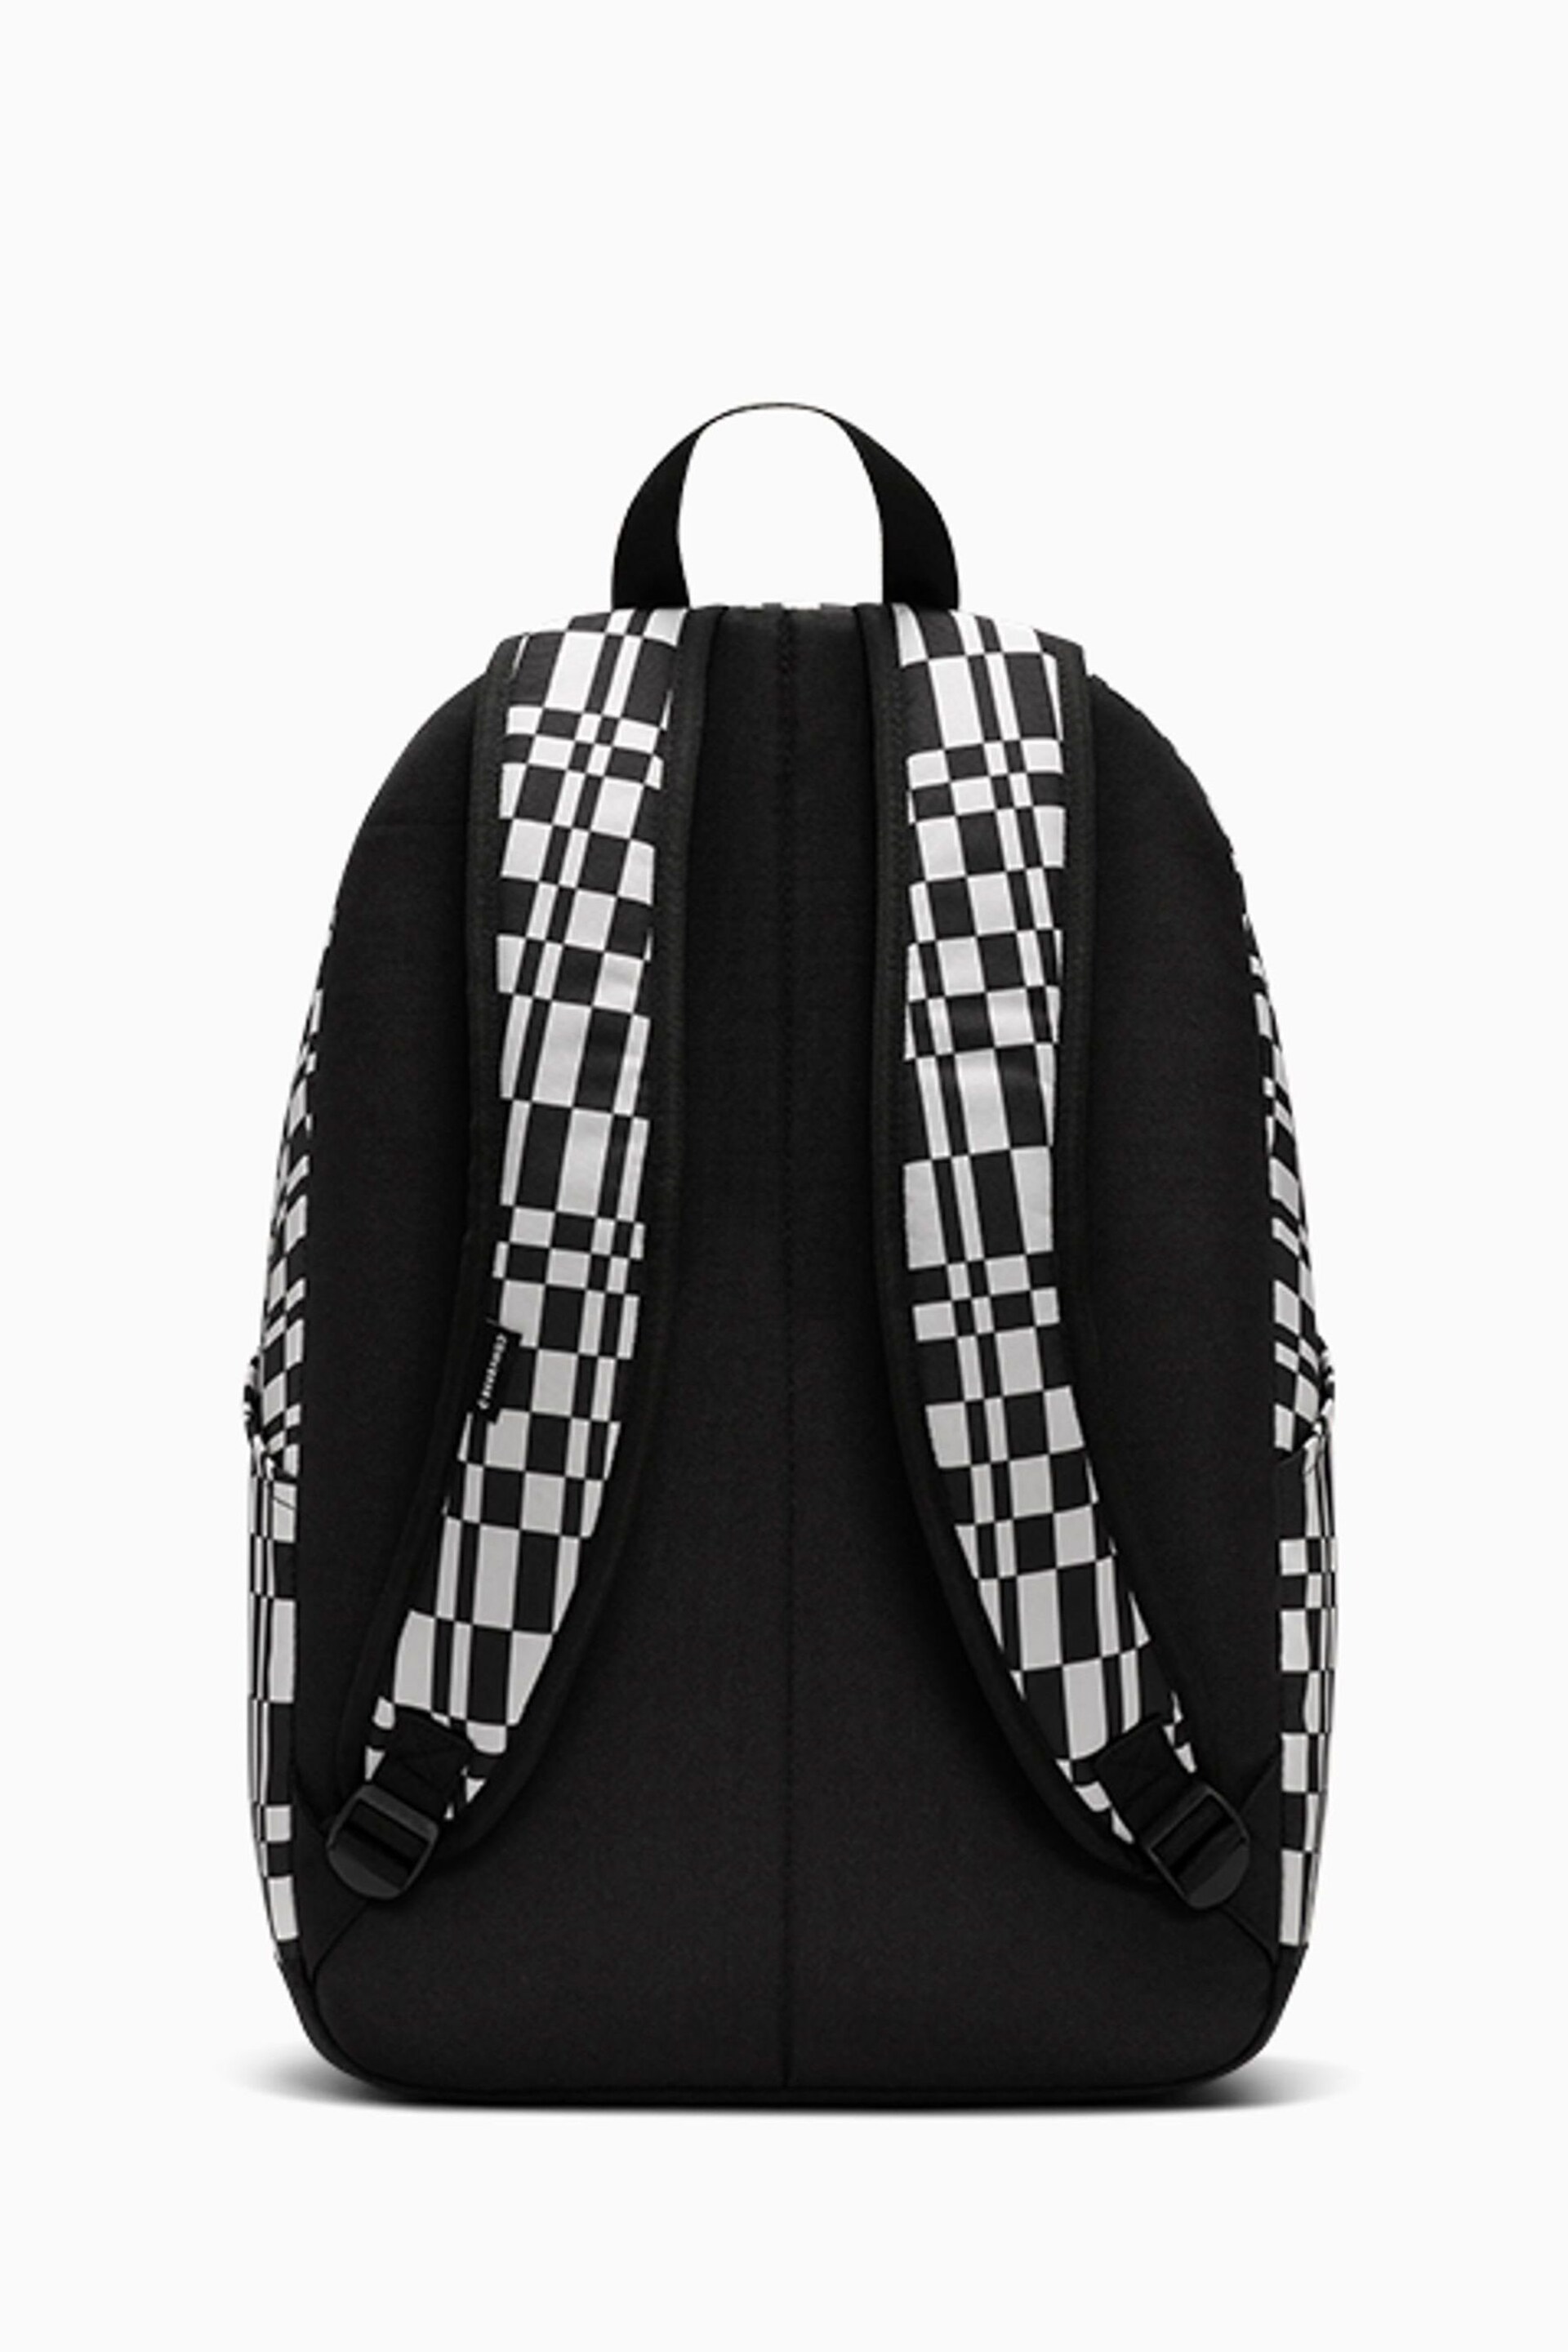 Converse Black Graphic Go 2 Backpack - Image 4 of 10